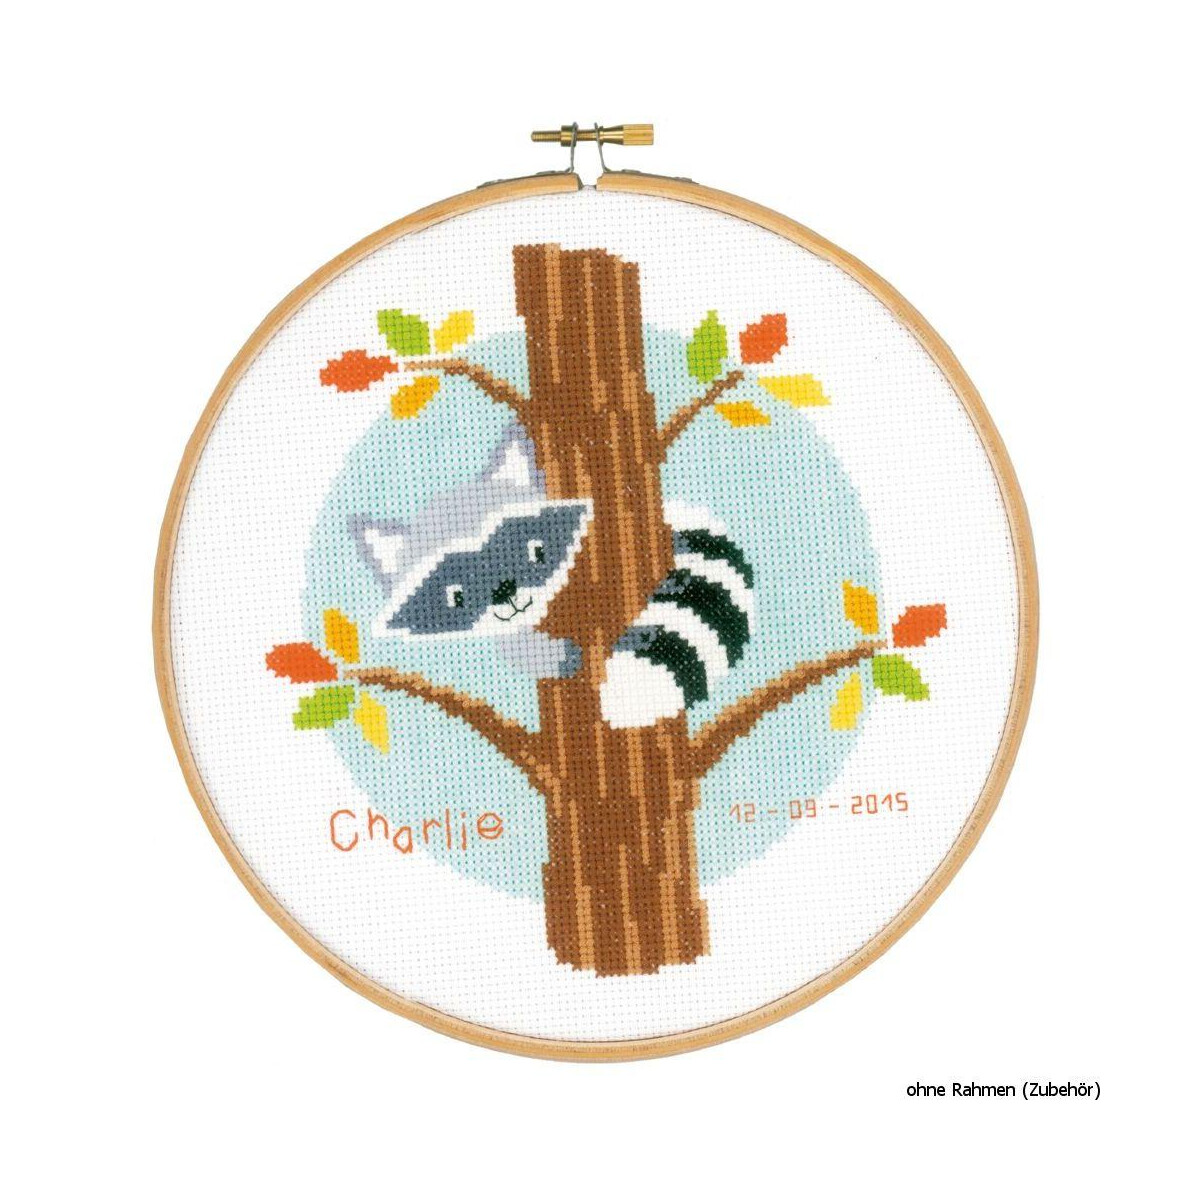 Vervaco Counted cross stitch kit Raccoon in tree, DIY